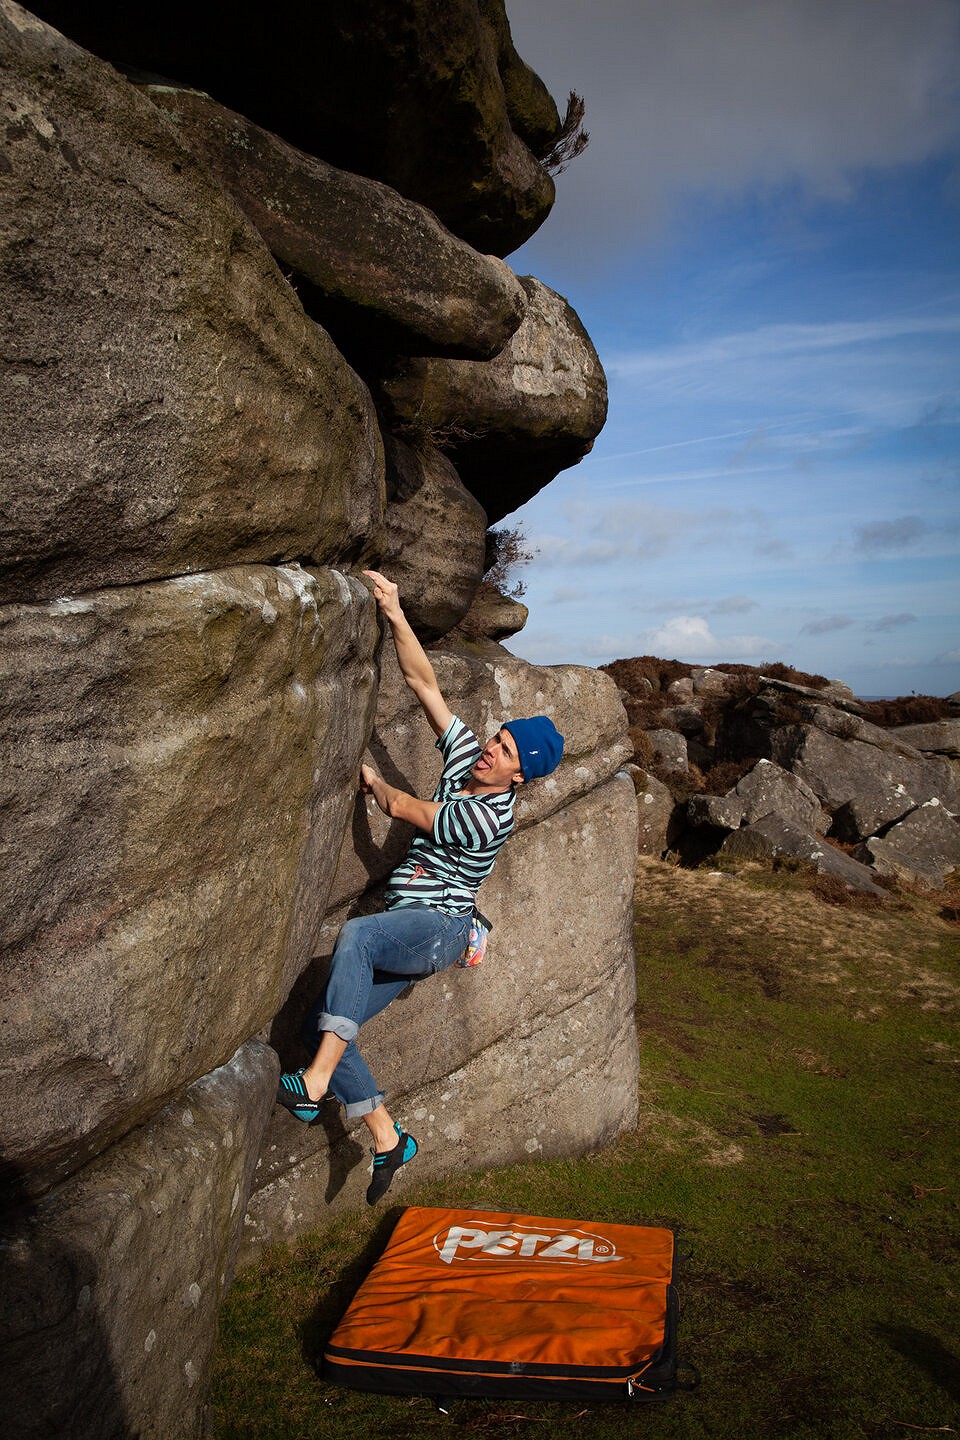 The Instinct S in use at Stanage, Apparent North  © Penny Orr